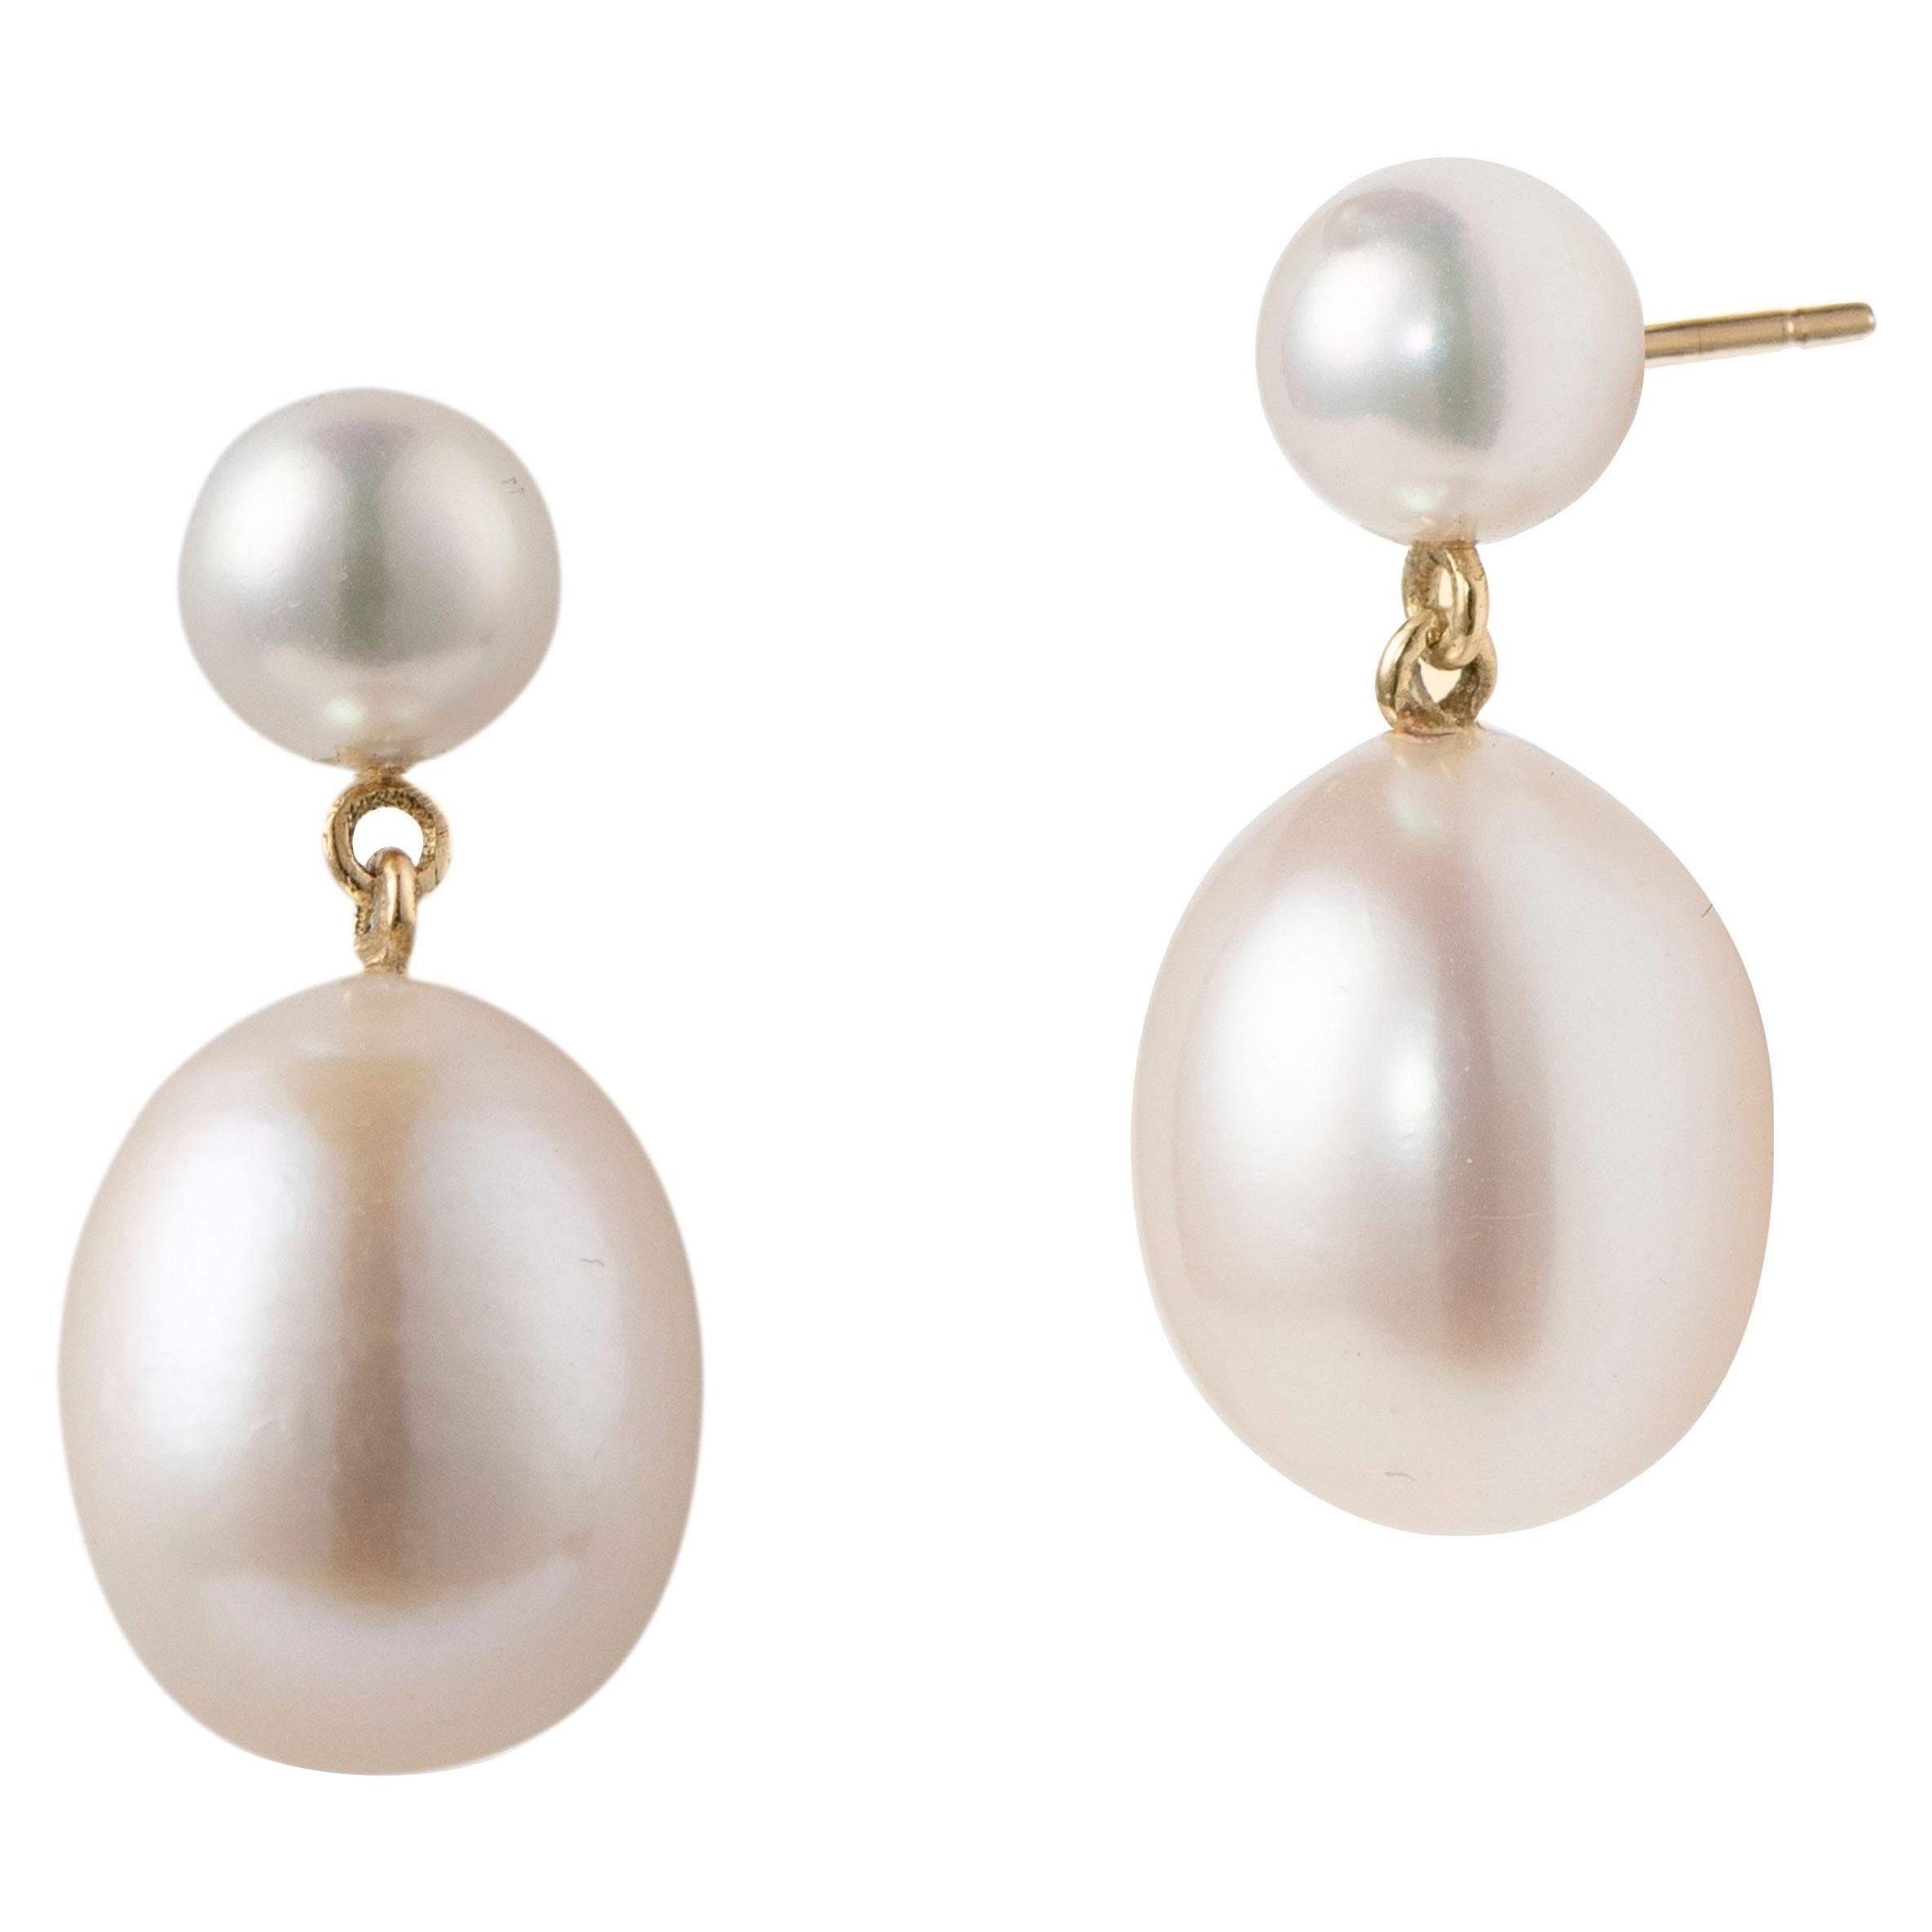 Double Drops Pearl Earrings, 18K Gold, by Michelle Massoura For Sale